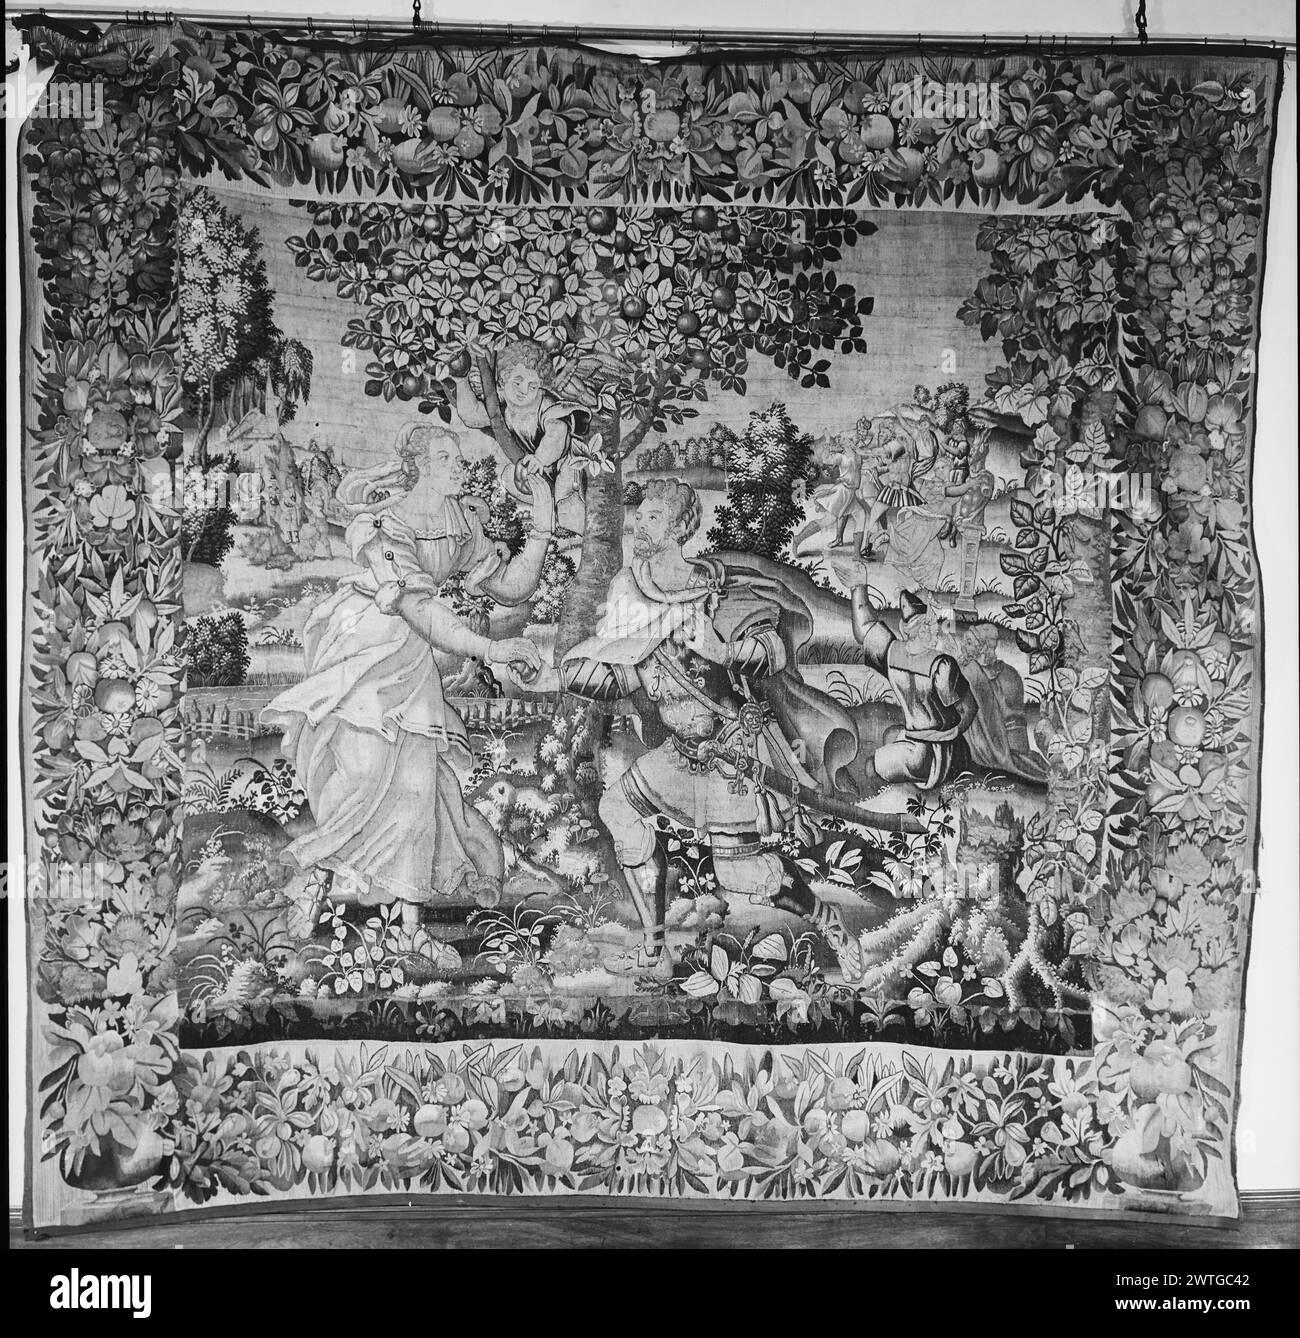 Venus (Aphrodite) presents Hippomenes with golden apples. unknown c. 1540 Tapestry Dimensions: H 11'8" x W 12'6" Tapestry Materials/Techniques: unknown Culture: Flemish Weaving Center: unknown Ownership History: French & Co. In landscape, Venus presents Hippomenes with golden apples as received from fruit-picking Cupid in tree above (center foreground); male suitor losing race against Atalanta & being punished (R background) (BRD) garlands of flowers, foliage & oversize fruit springing from vessels on plinths in lower corners Border not original to this tapestry. French & Co. stock sheet missi Stock Photo